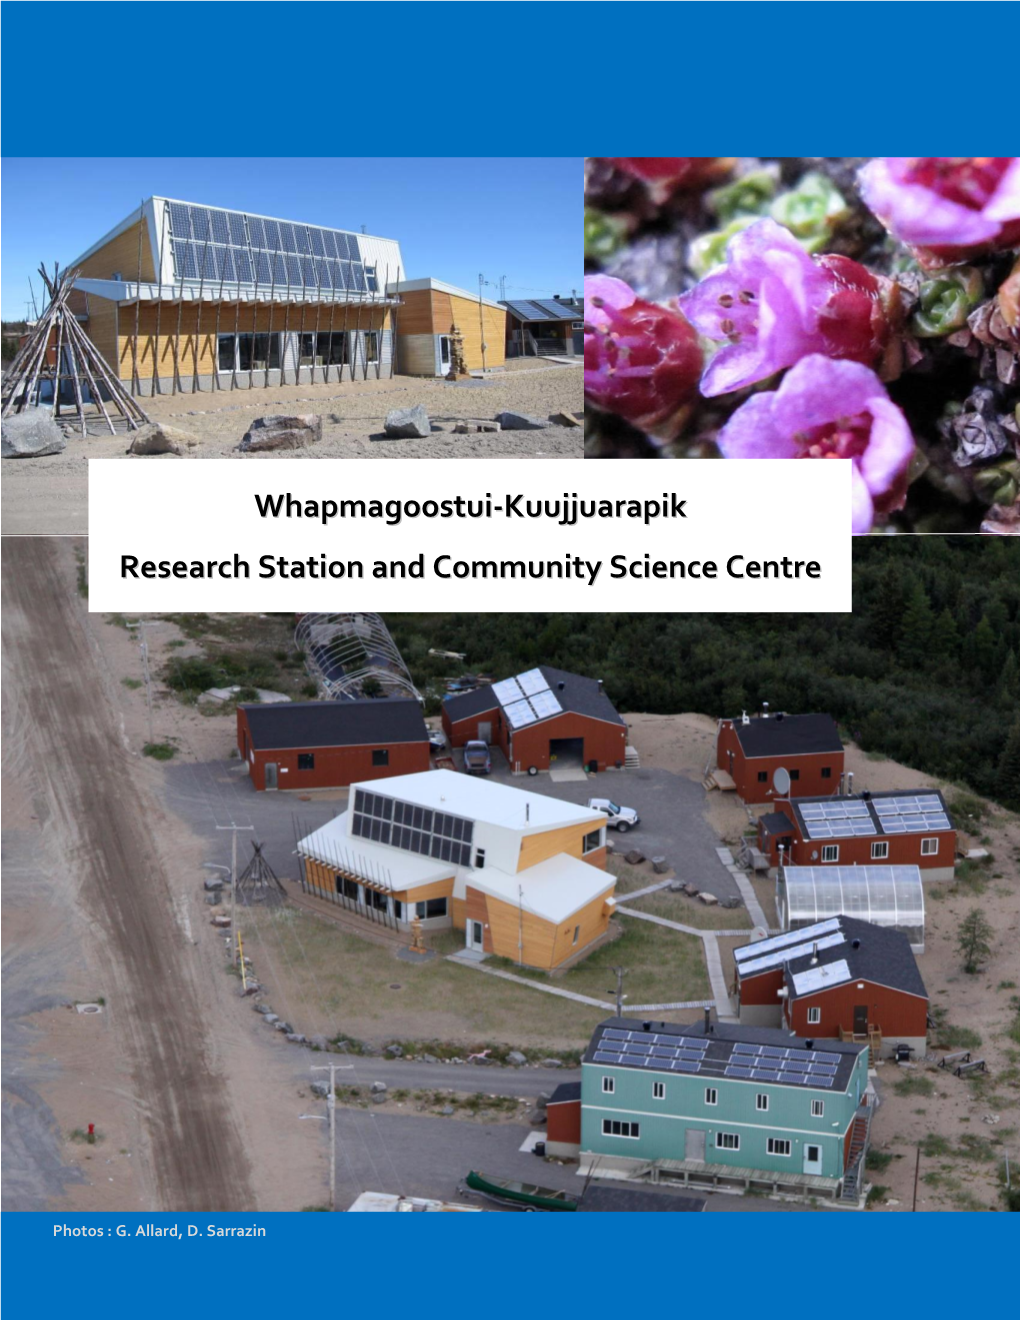 Whapmagoostui-Kuujjuarapik Research Station and Community Science Centre